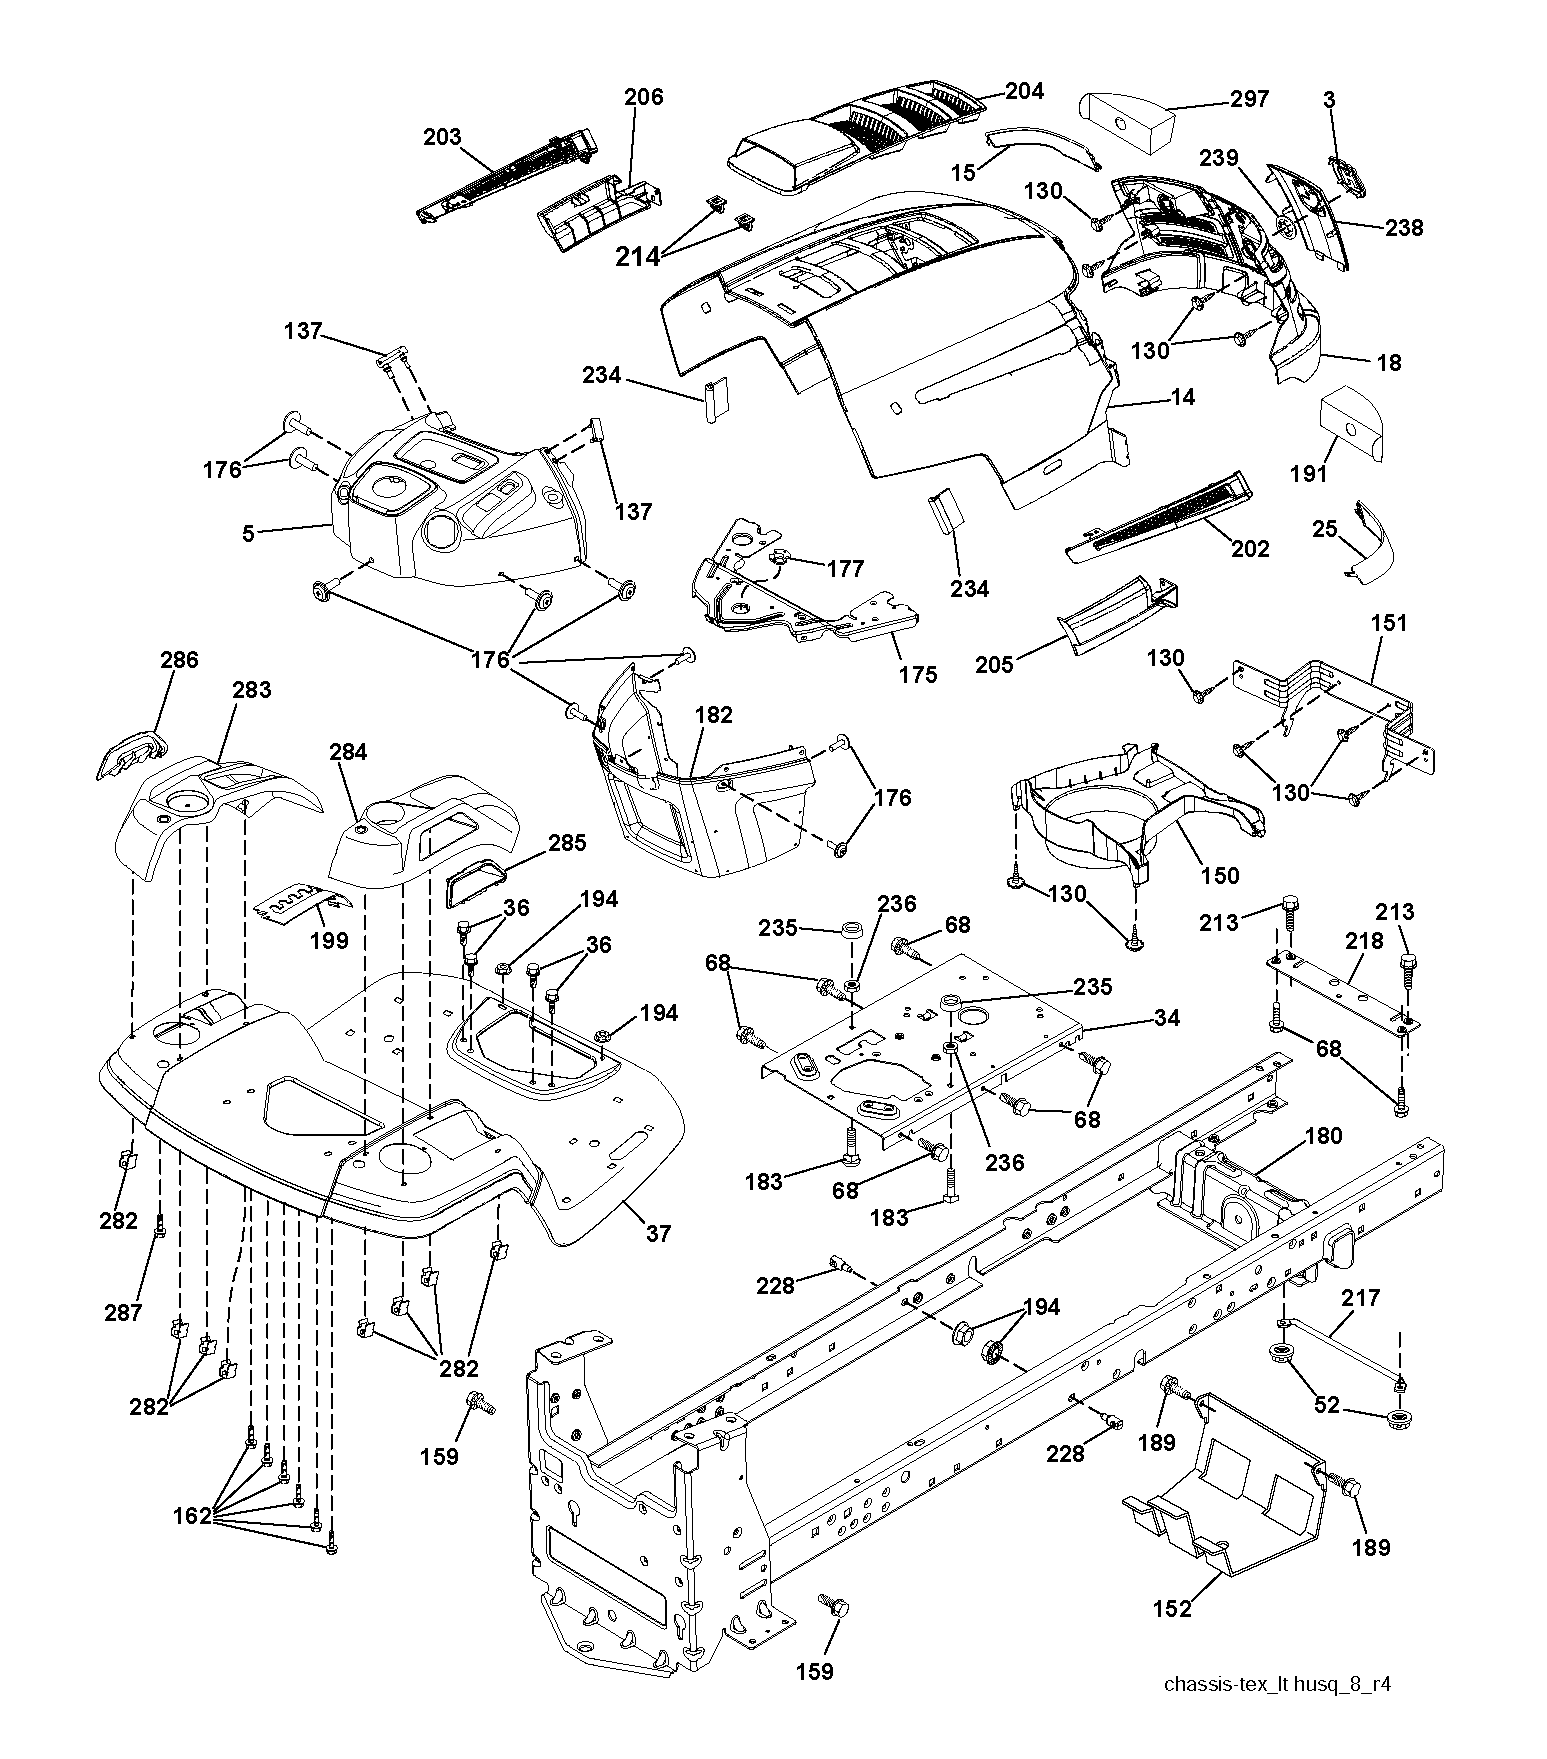 Chassis and appendix 532430771, 532407592, 532441267, 532406664, 584382301, 532406663, 532196125, 596030701, 532441266, 596040501, 596030701, 596321701, 532407590, 532407537, 532407807, 531169901, 817000612, 532142432, 532199472, 532400776, 532195228, 532195457, 532407176, 874520520, 532428867, 532416500, 873900500, 532413485, 532411074, 532411785, 532441375, 532411076, 532411077, 596030501, 532199145, 532409167, 532196395, 593824001, 532404742, 532406129, 873930500, 532444481, 532404883, 532414110, 532416316, 532417887, 532416315, 532416317, 817600406, 532406665